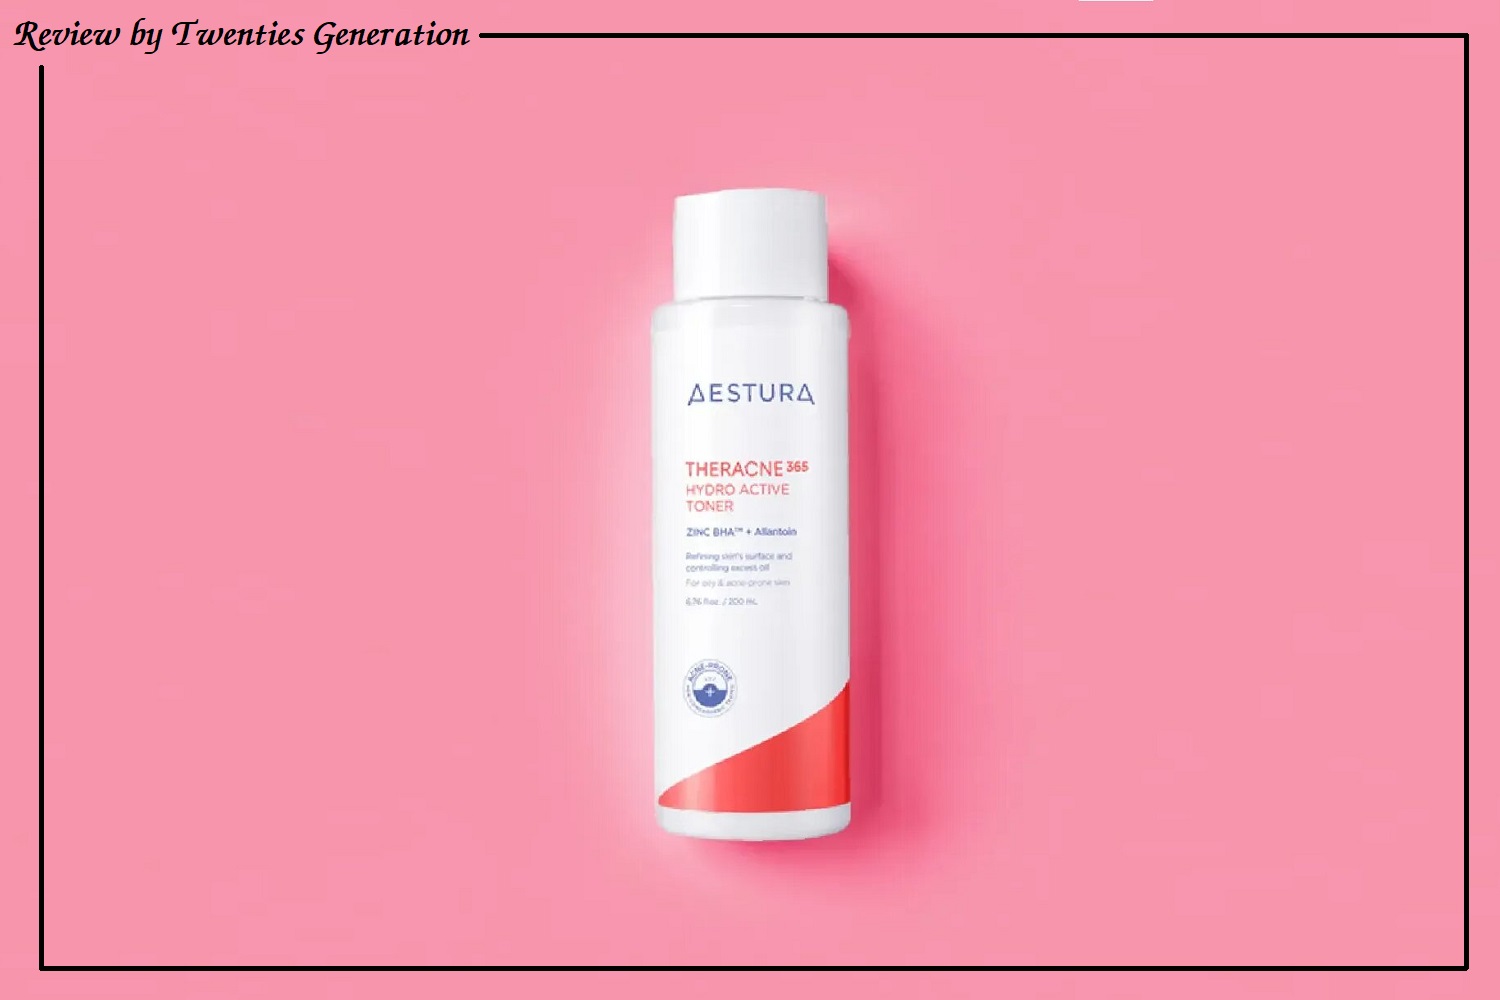 Aestura Theracne365 Hydro Active Toner Ingredients